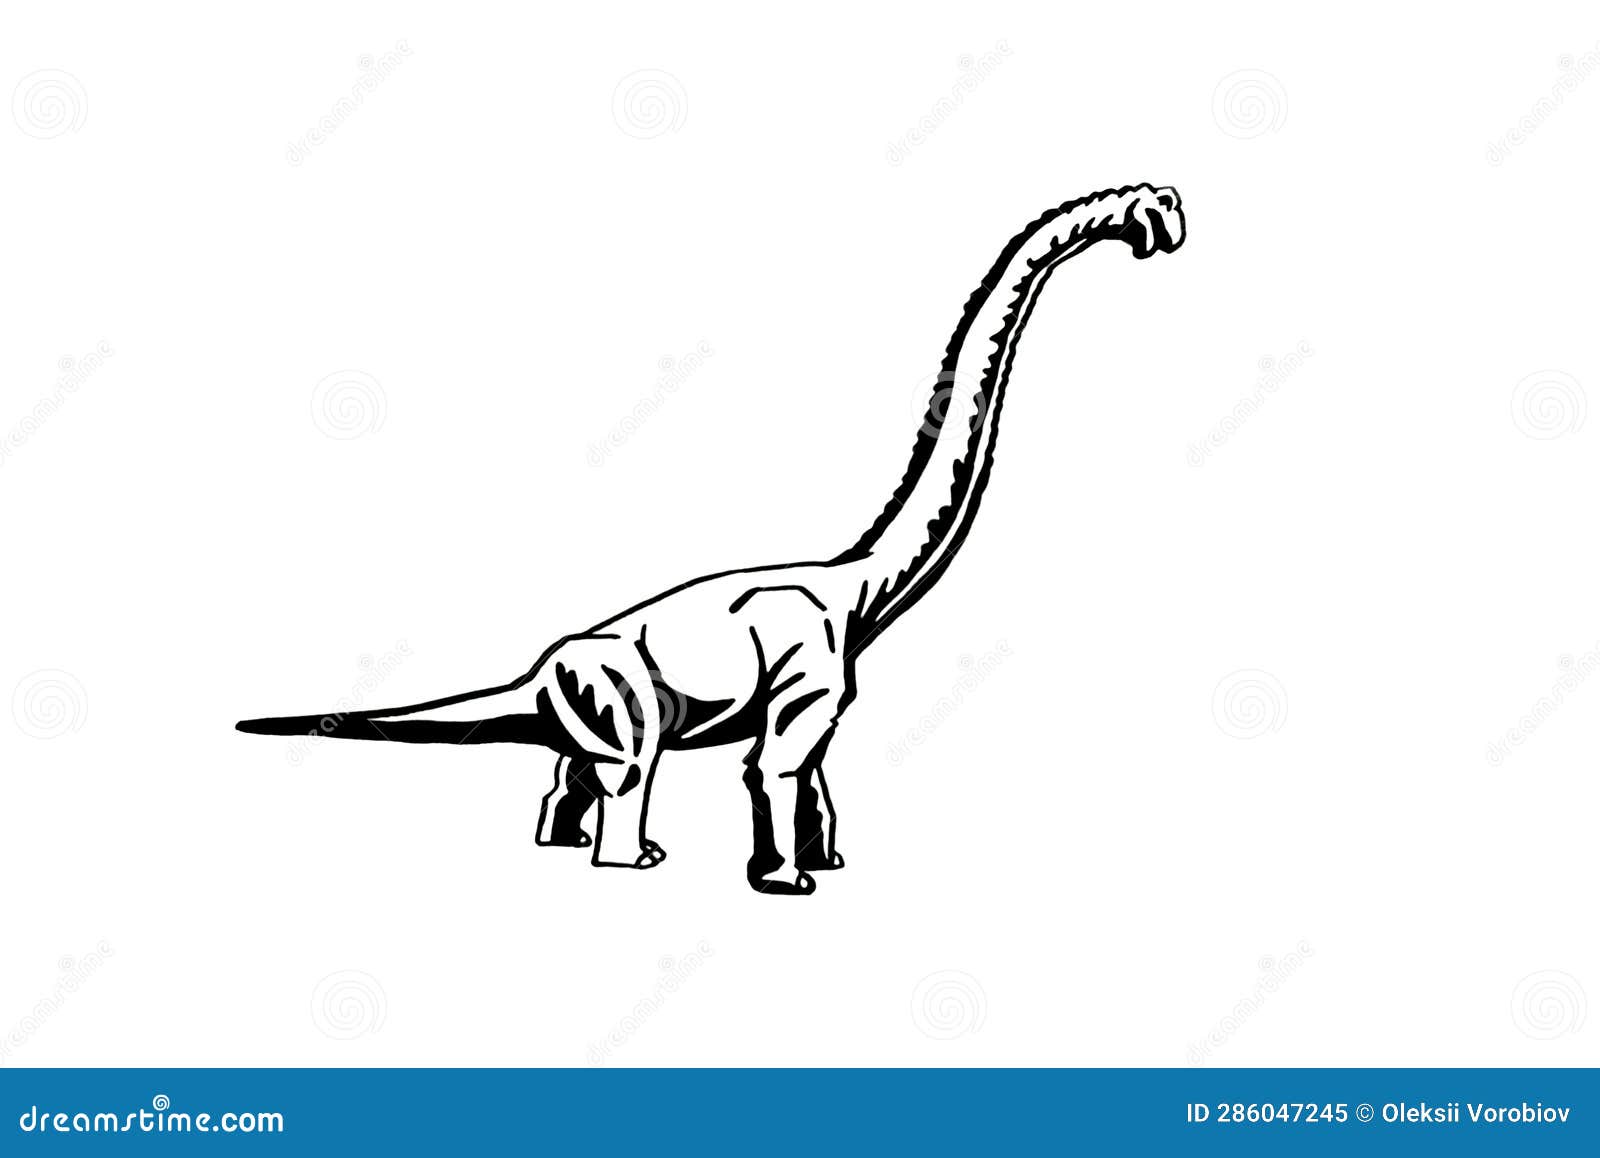 Diplodocus Black and White Stock Photos & Images - Alamy